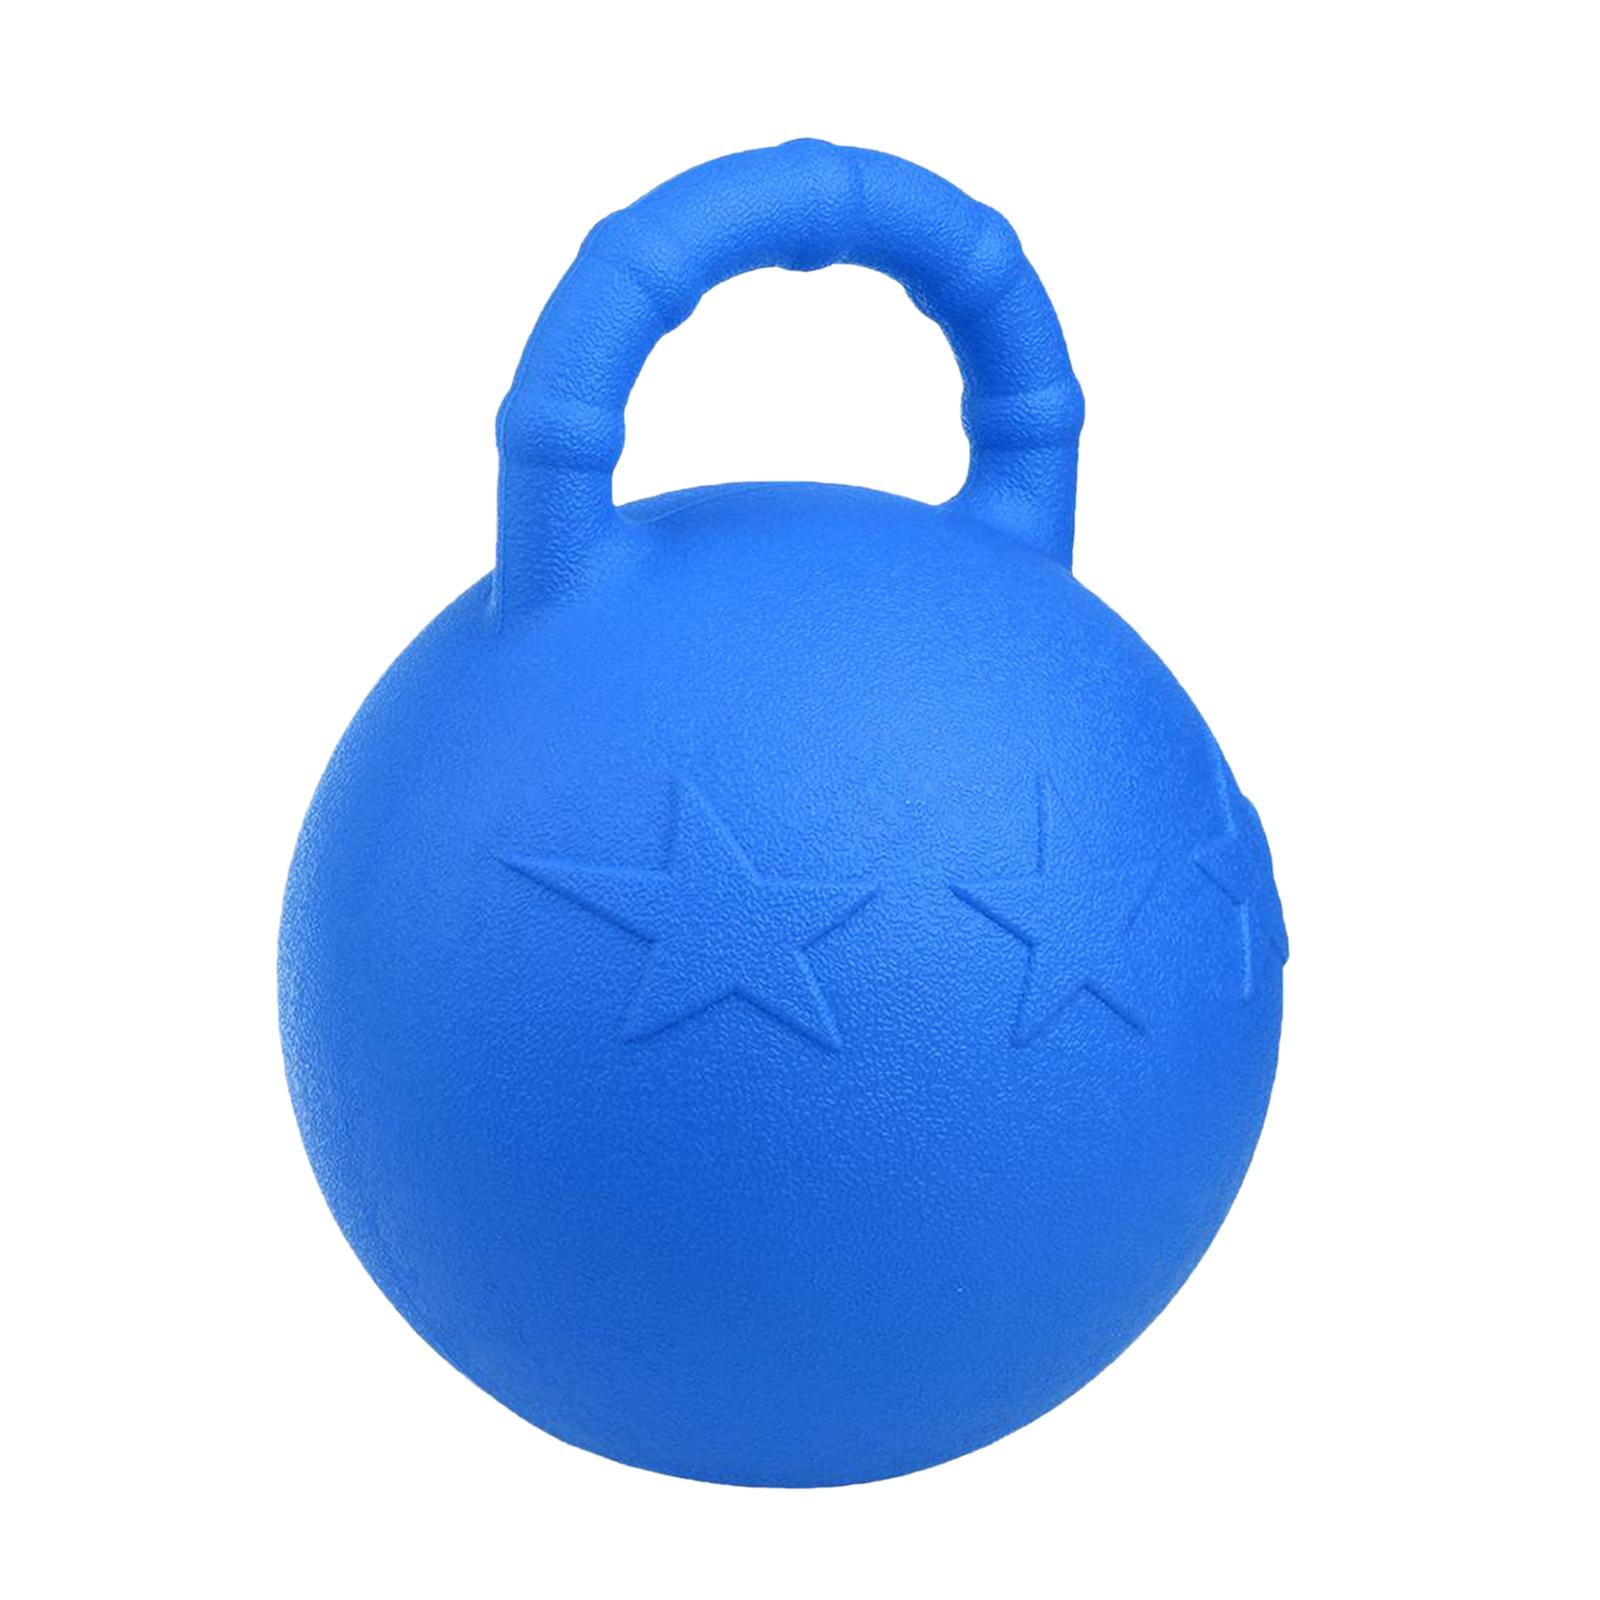 ANC POP Herding Ball for Dogs Horse Ball & Ball Cover 25 Ball for Horses  Large with Hand Pump for Play Herding Ball Herding Ball Horse Toys for